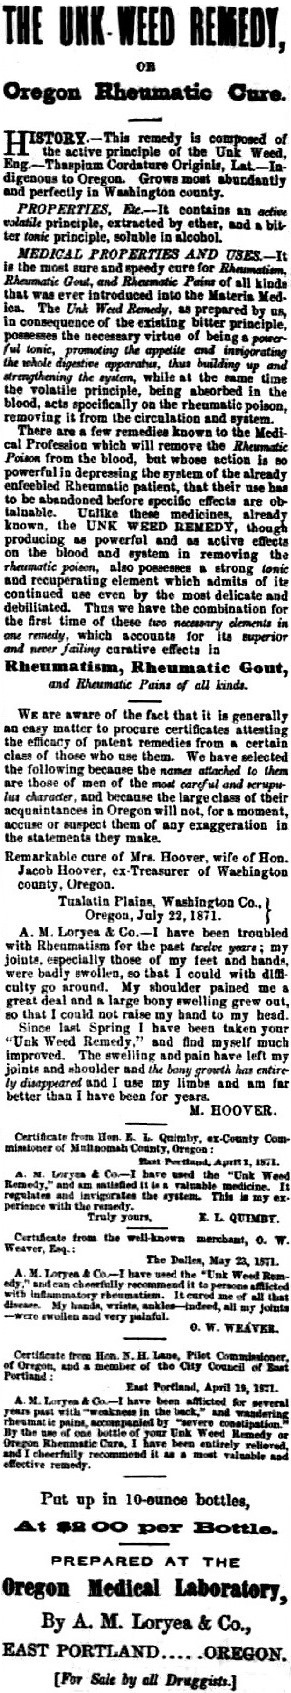 Unk Weed Remedy ad, September 7, 1872 Oregon Sentinel